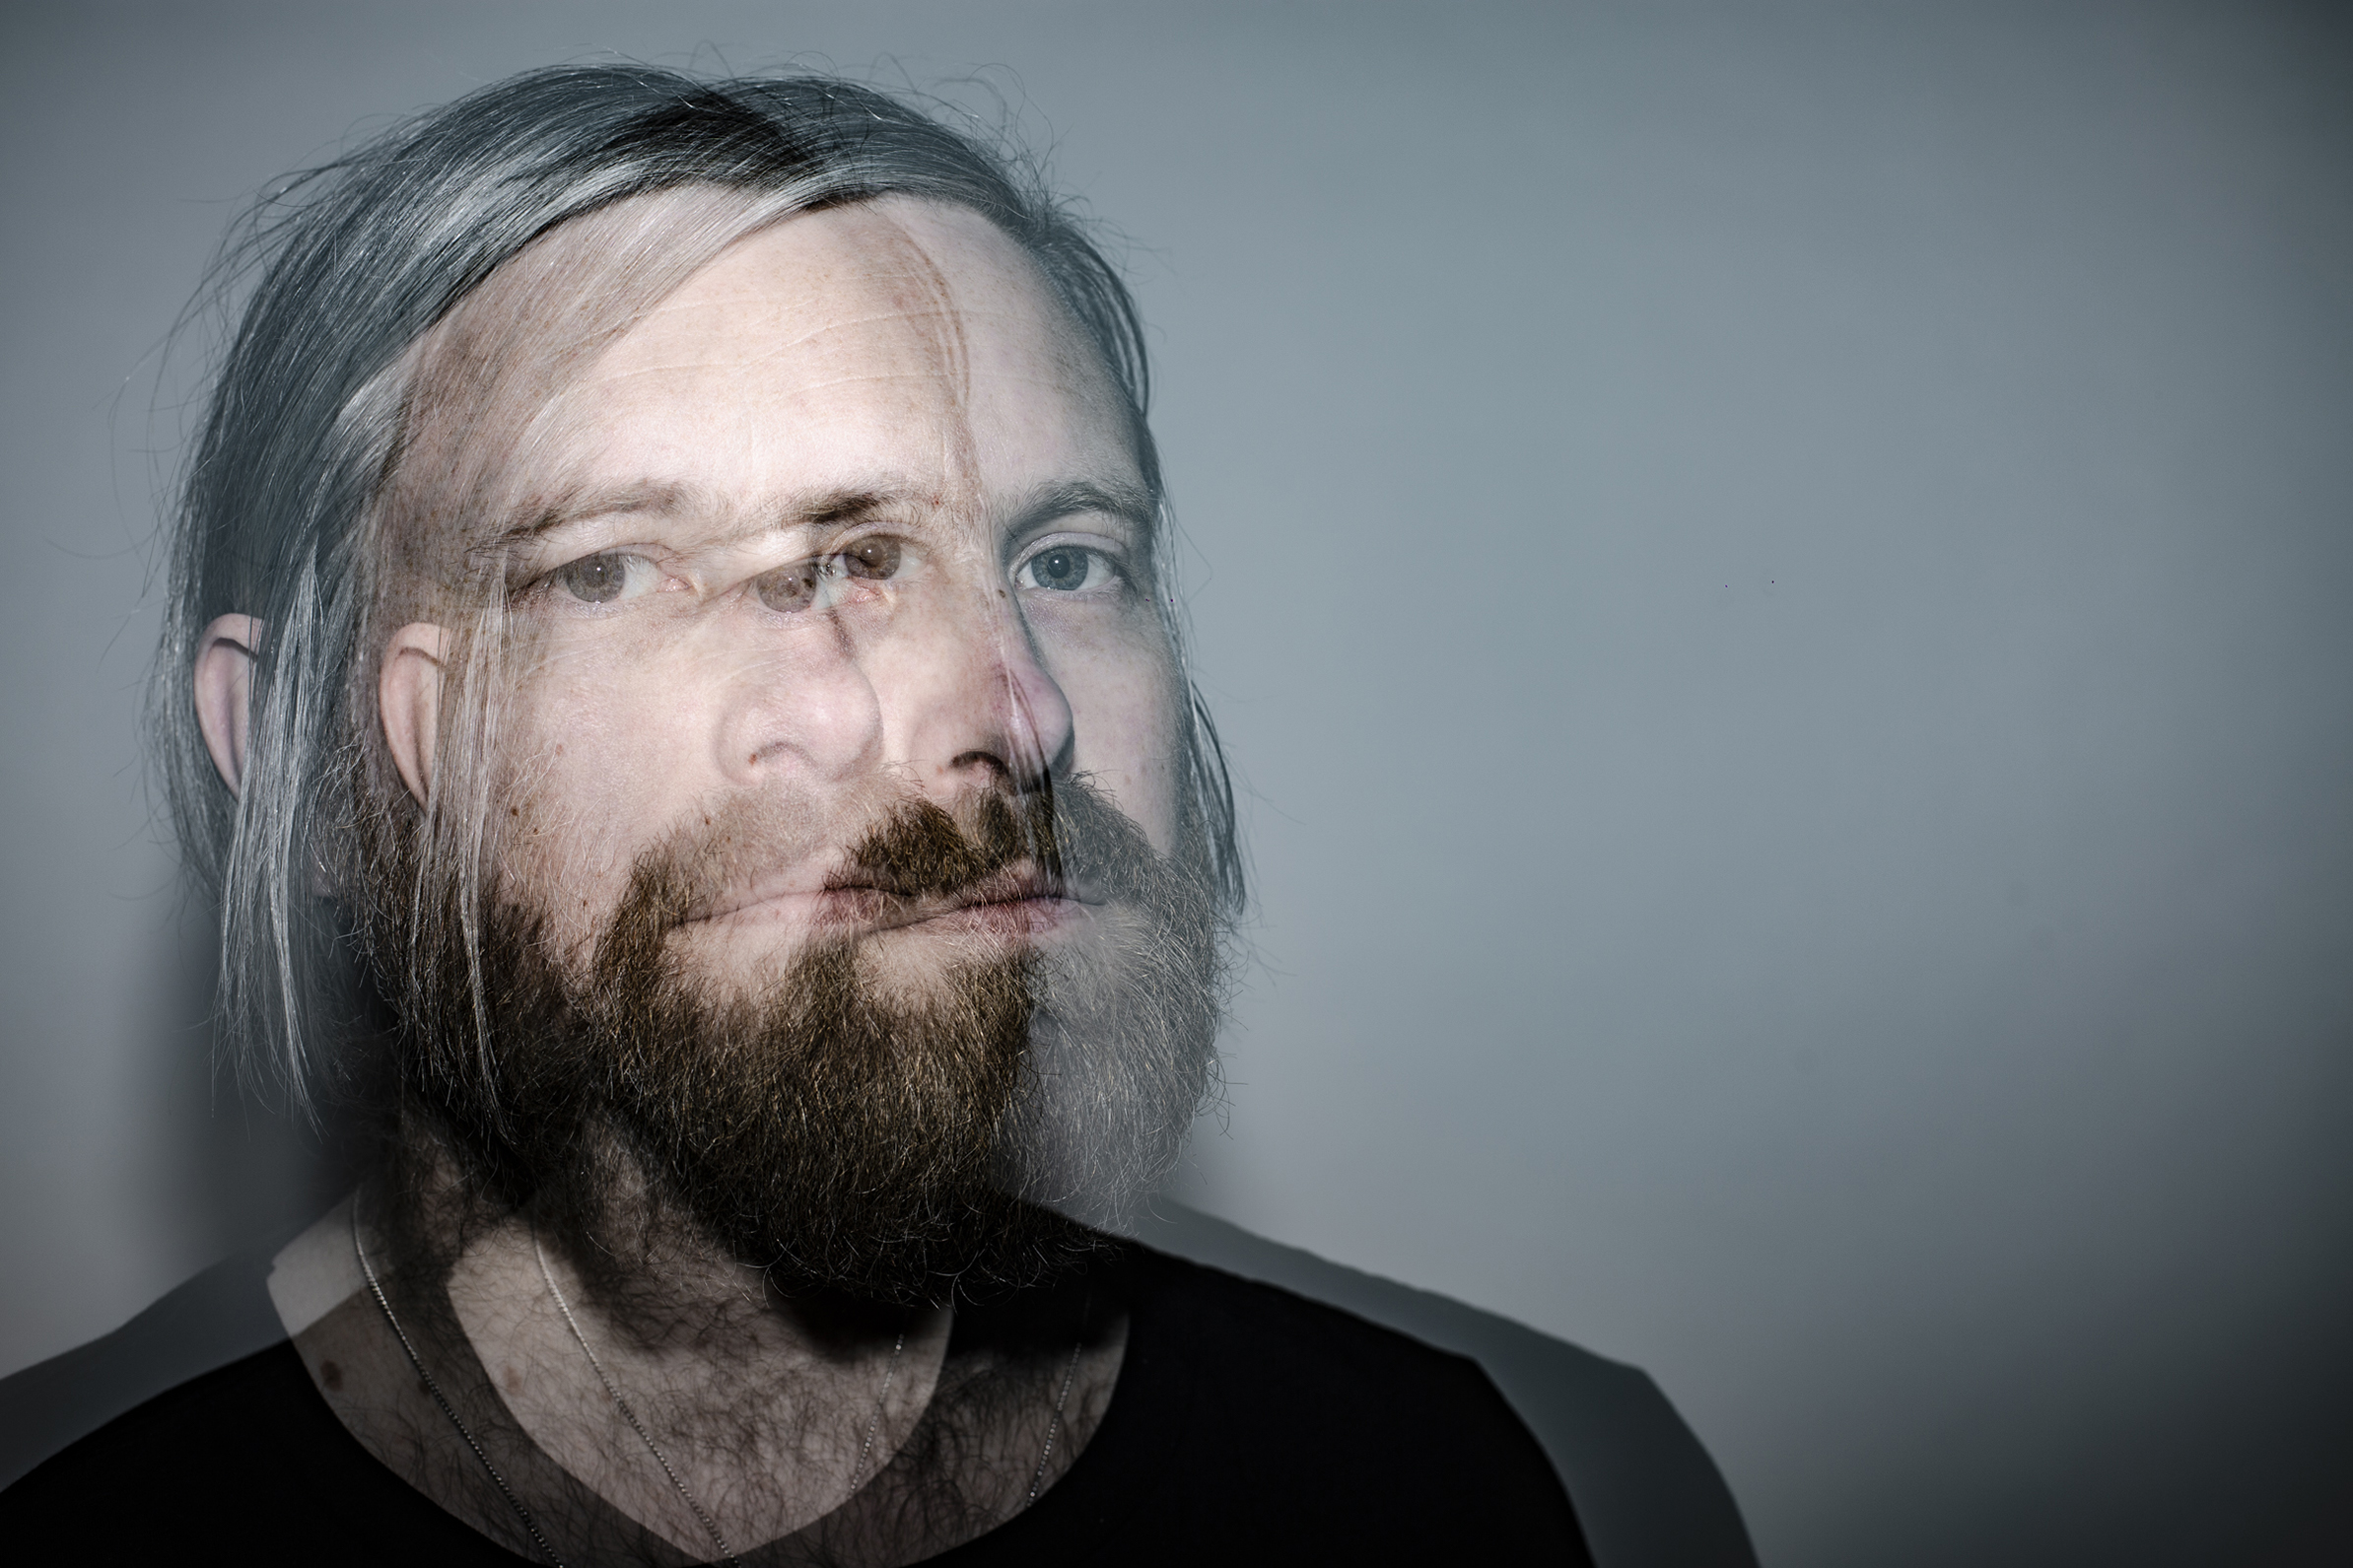 BLANCK MASS announces limited edition LP 'Mind Killer' - Out May 14th 1